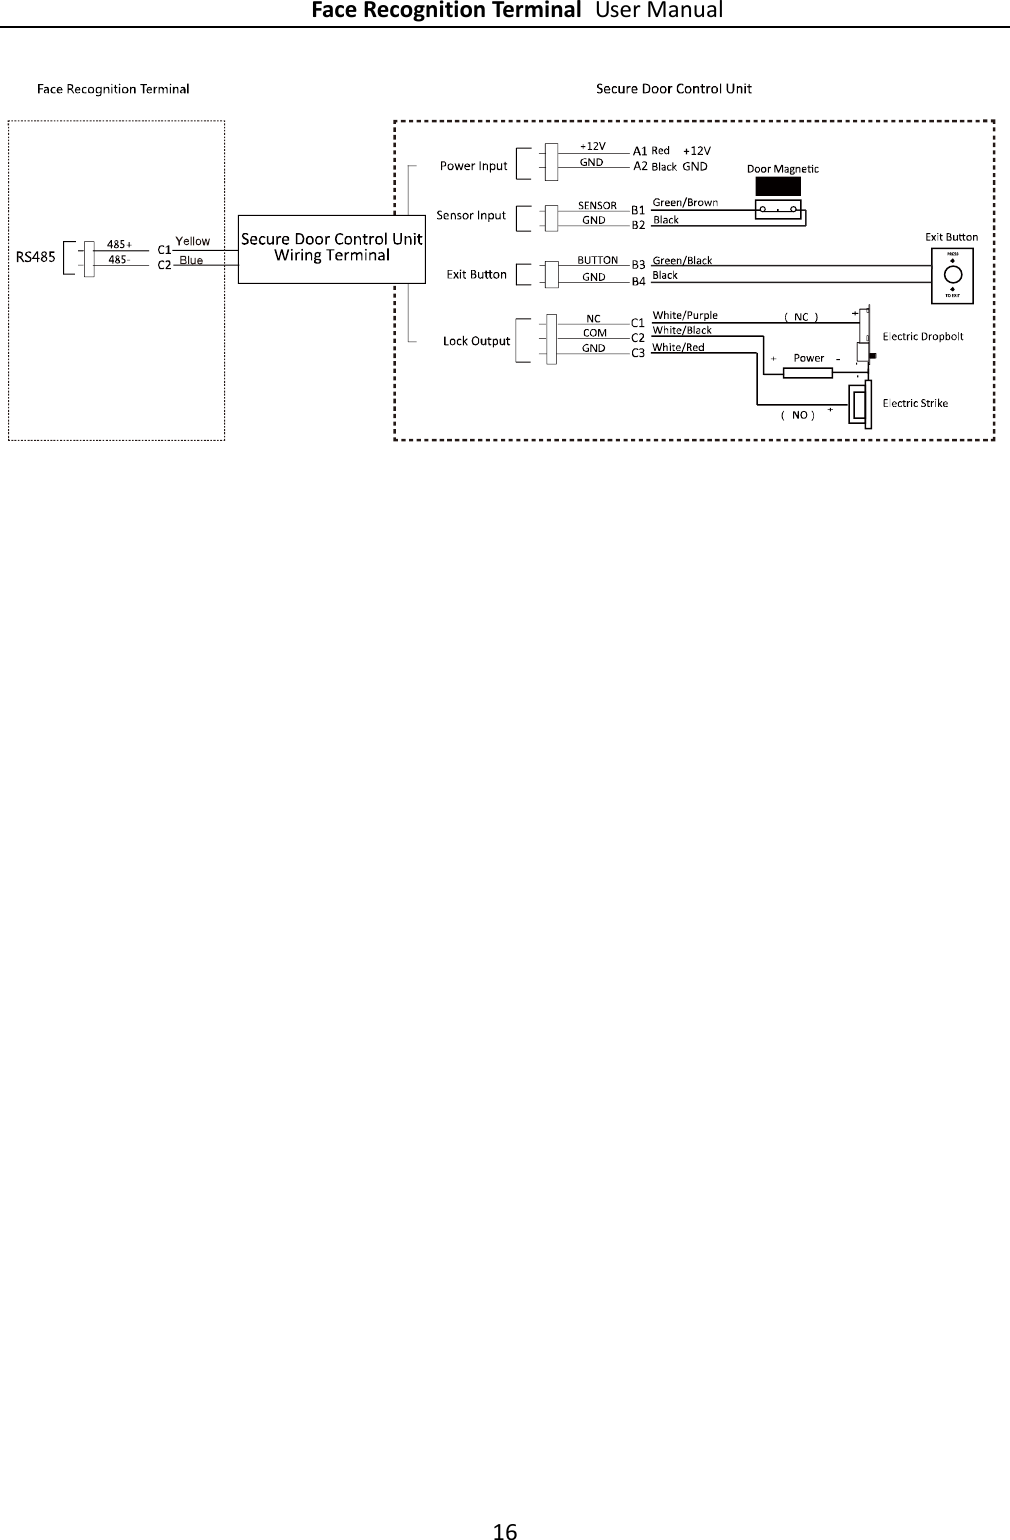 Page 17 of Hangzhou Hikvision Digital Technology K1T604 Face Recognition Terminal User Manual 